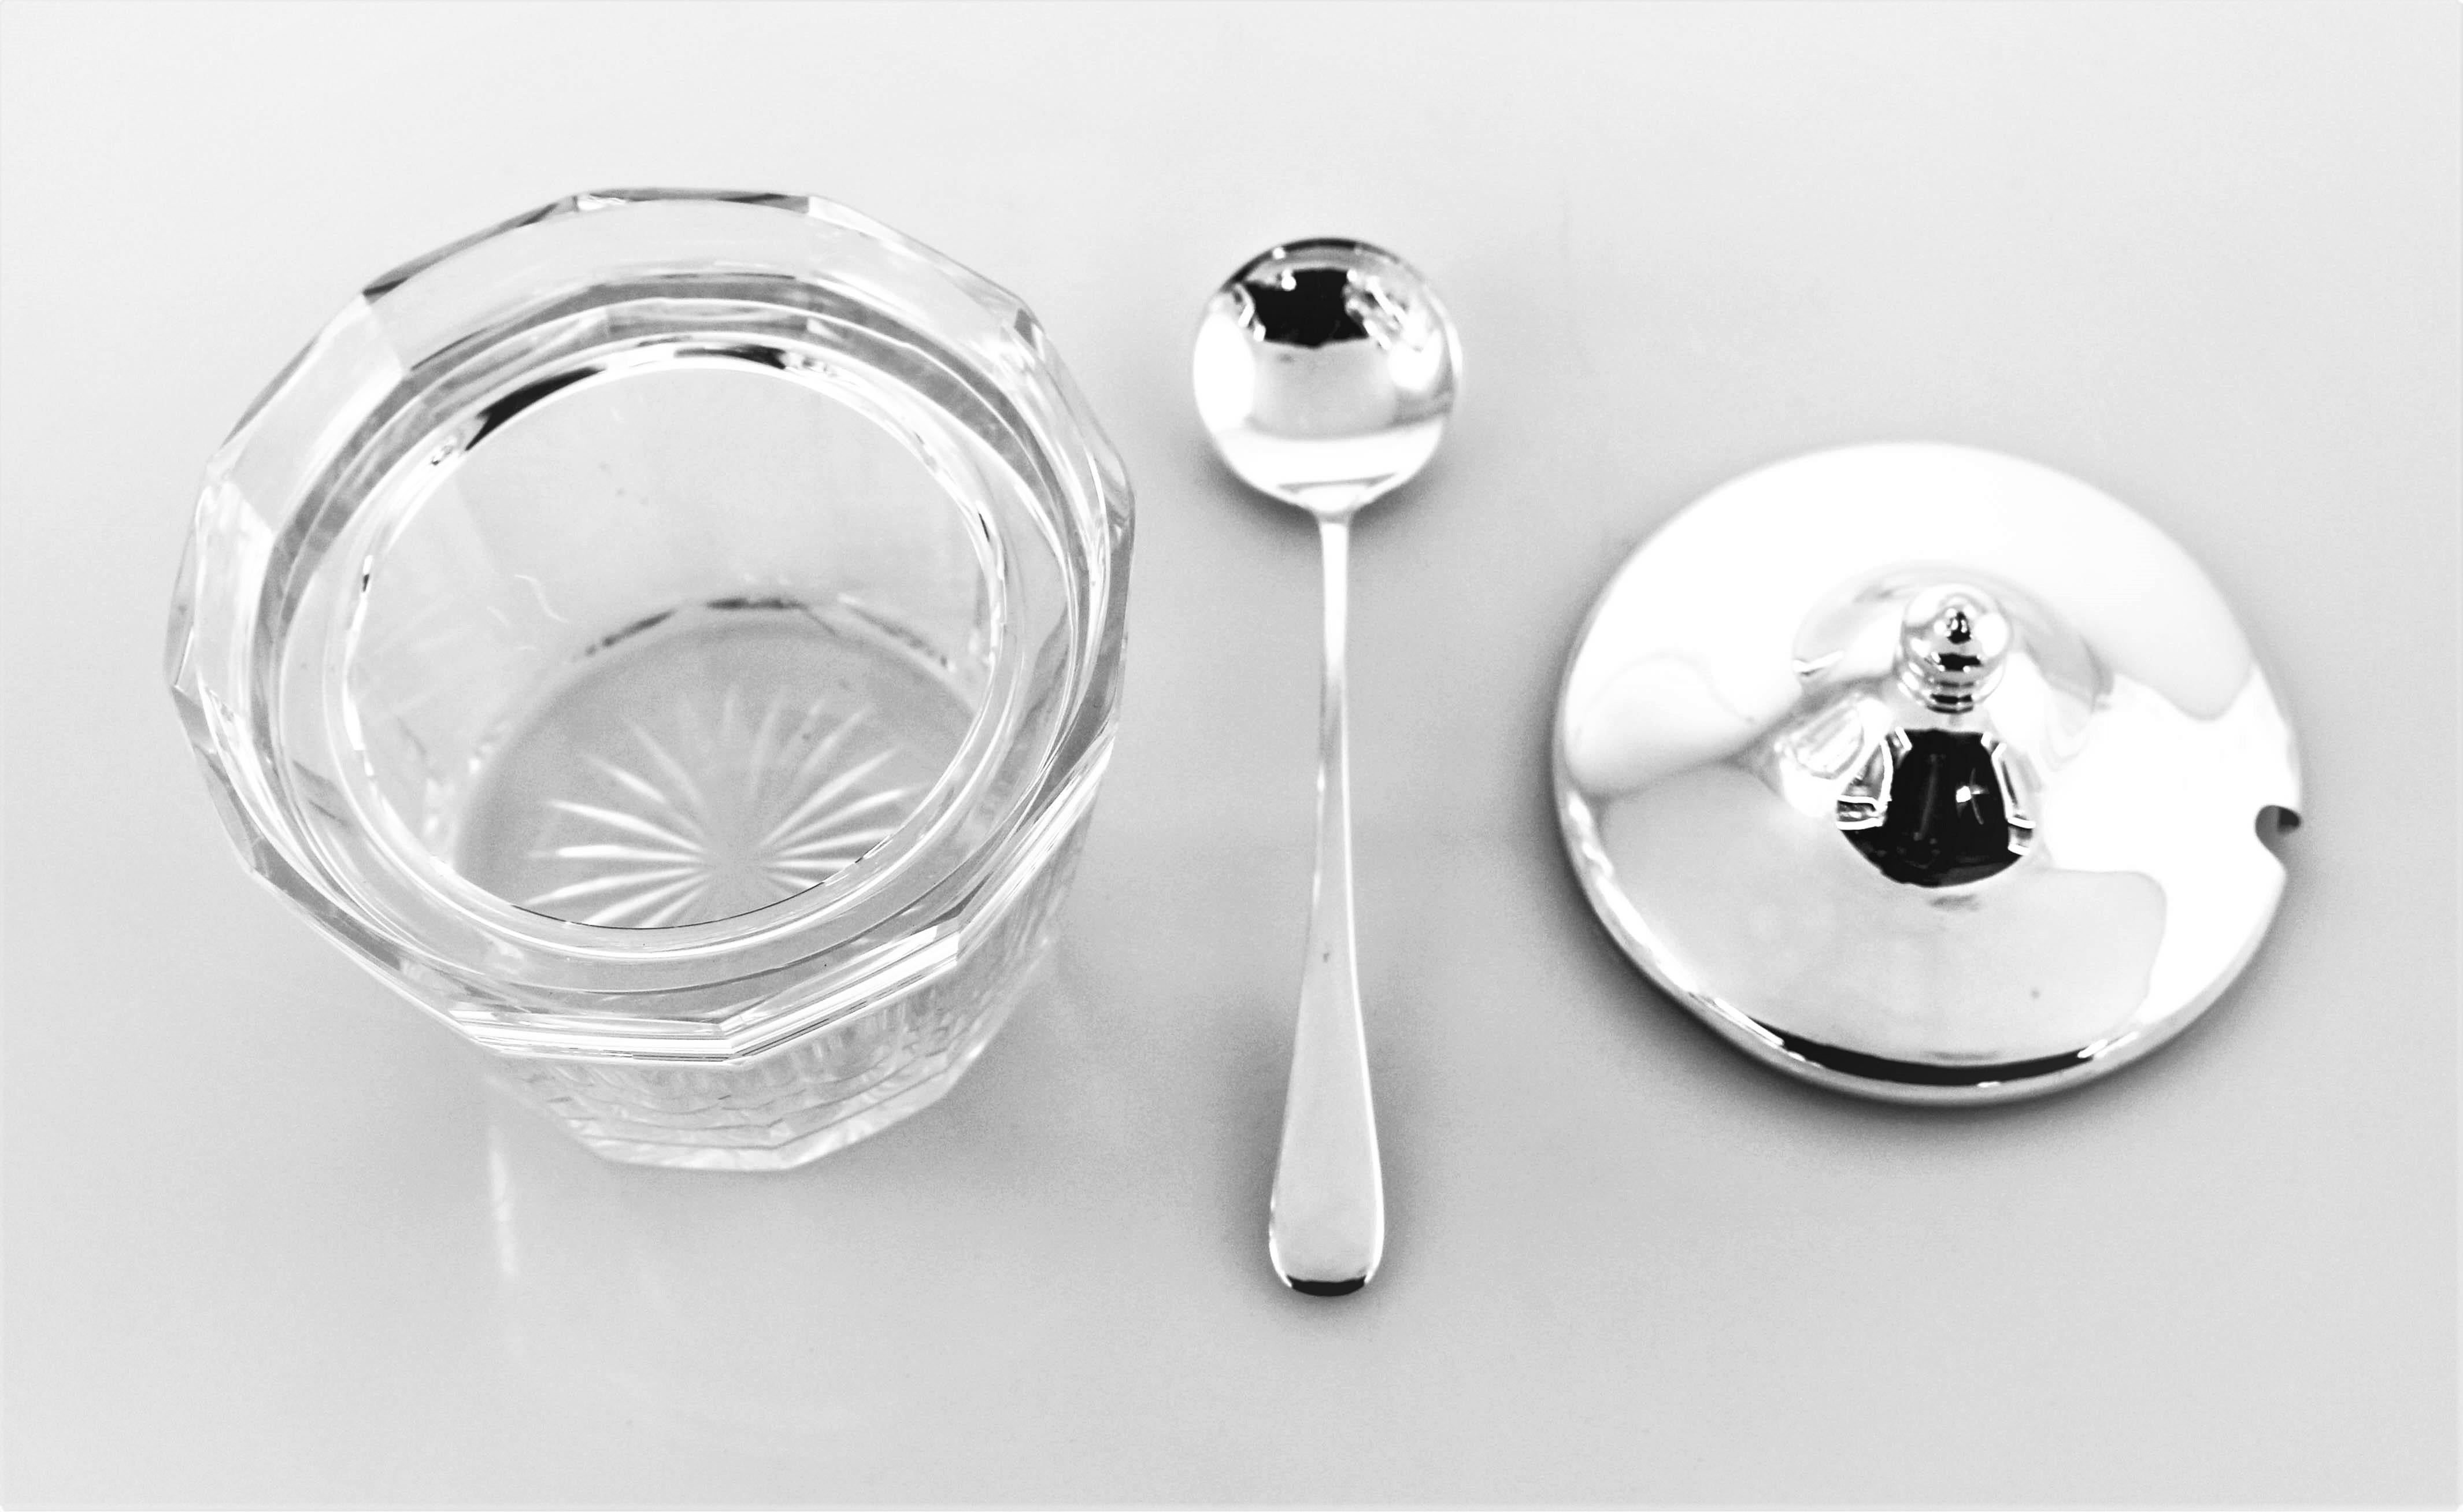 A sterling lid and spoon with a lovely crystal jar. The jar has a starburst on the bottom and is paneled around the side. The lid and spoon are clean and sleek and are original to the set. Great for jams, honey, mustard or any other condiments.